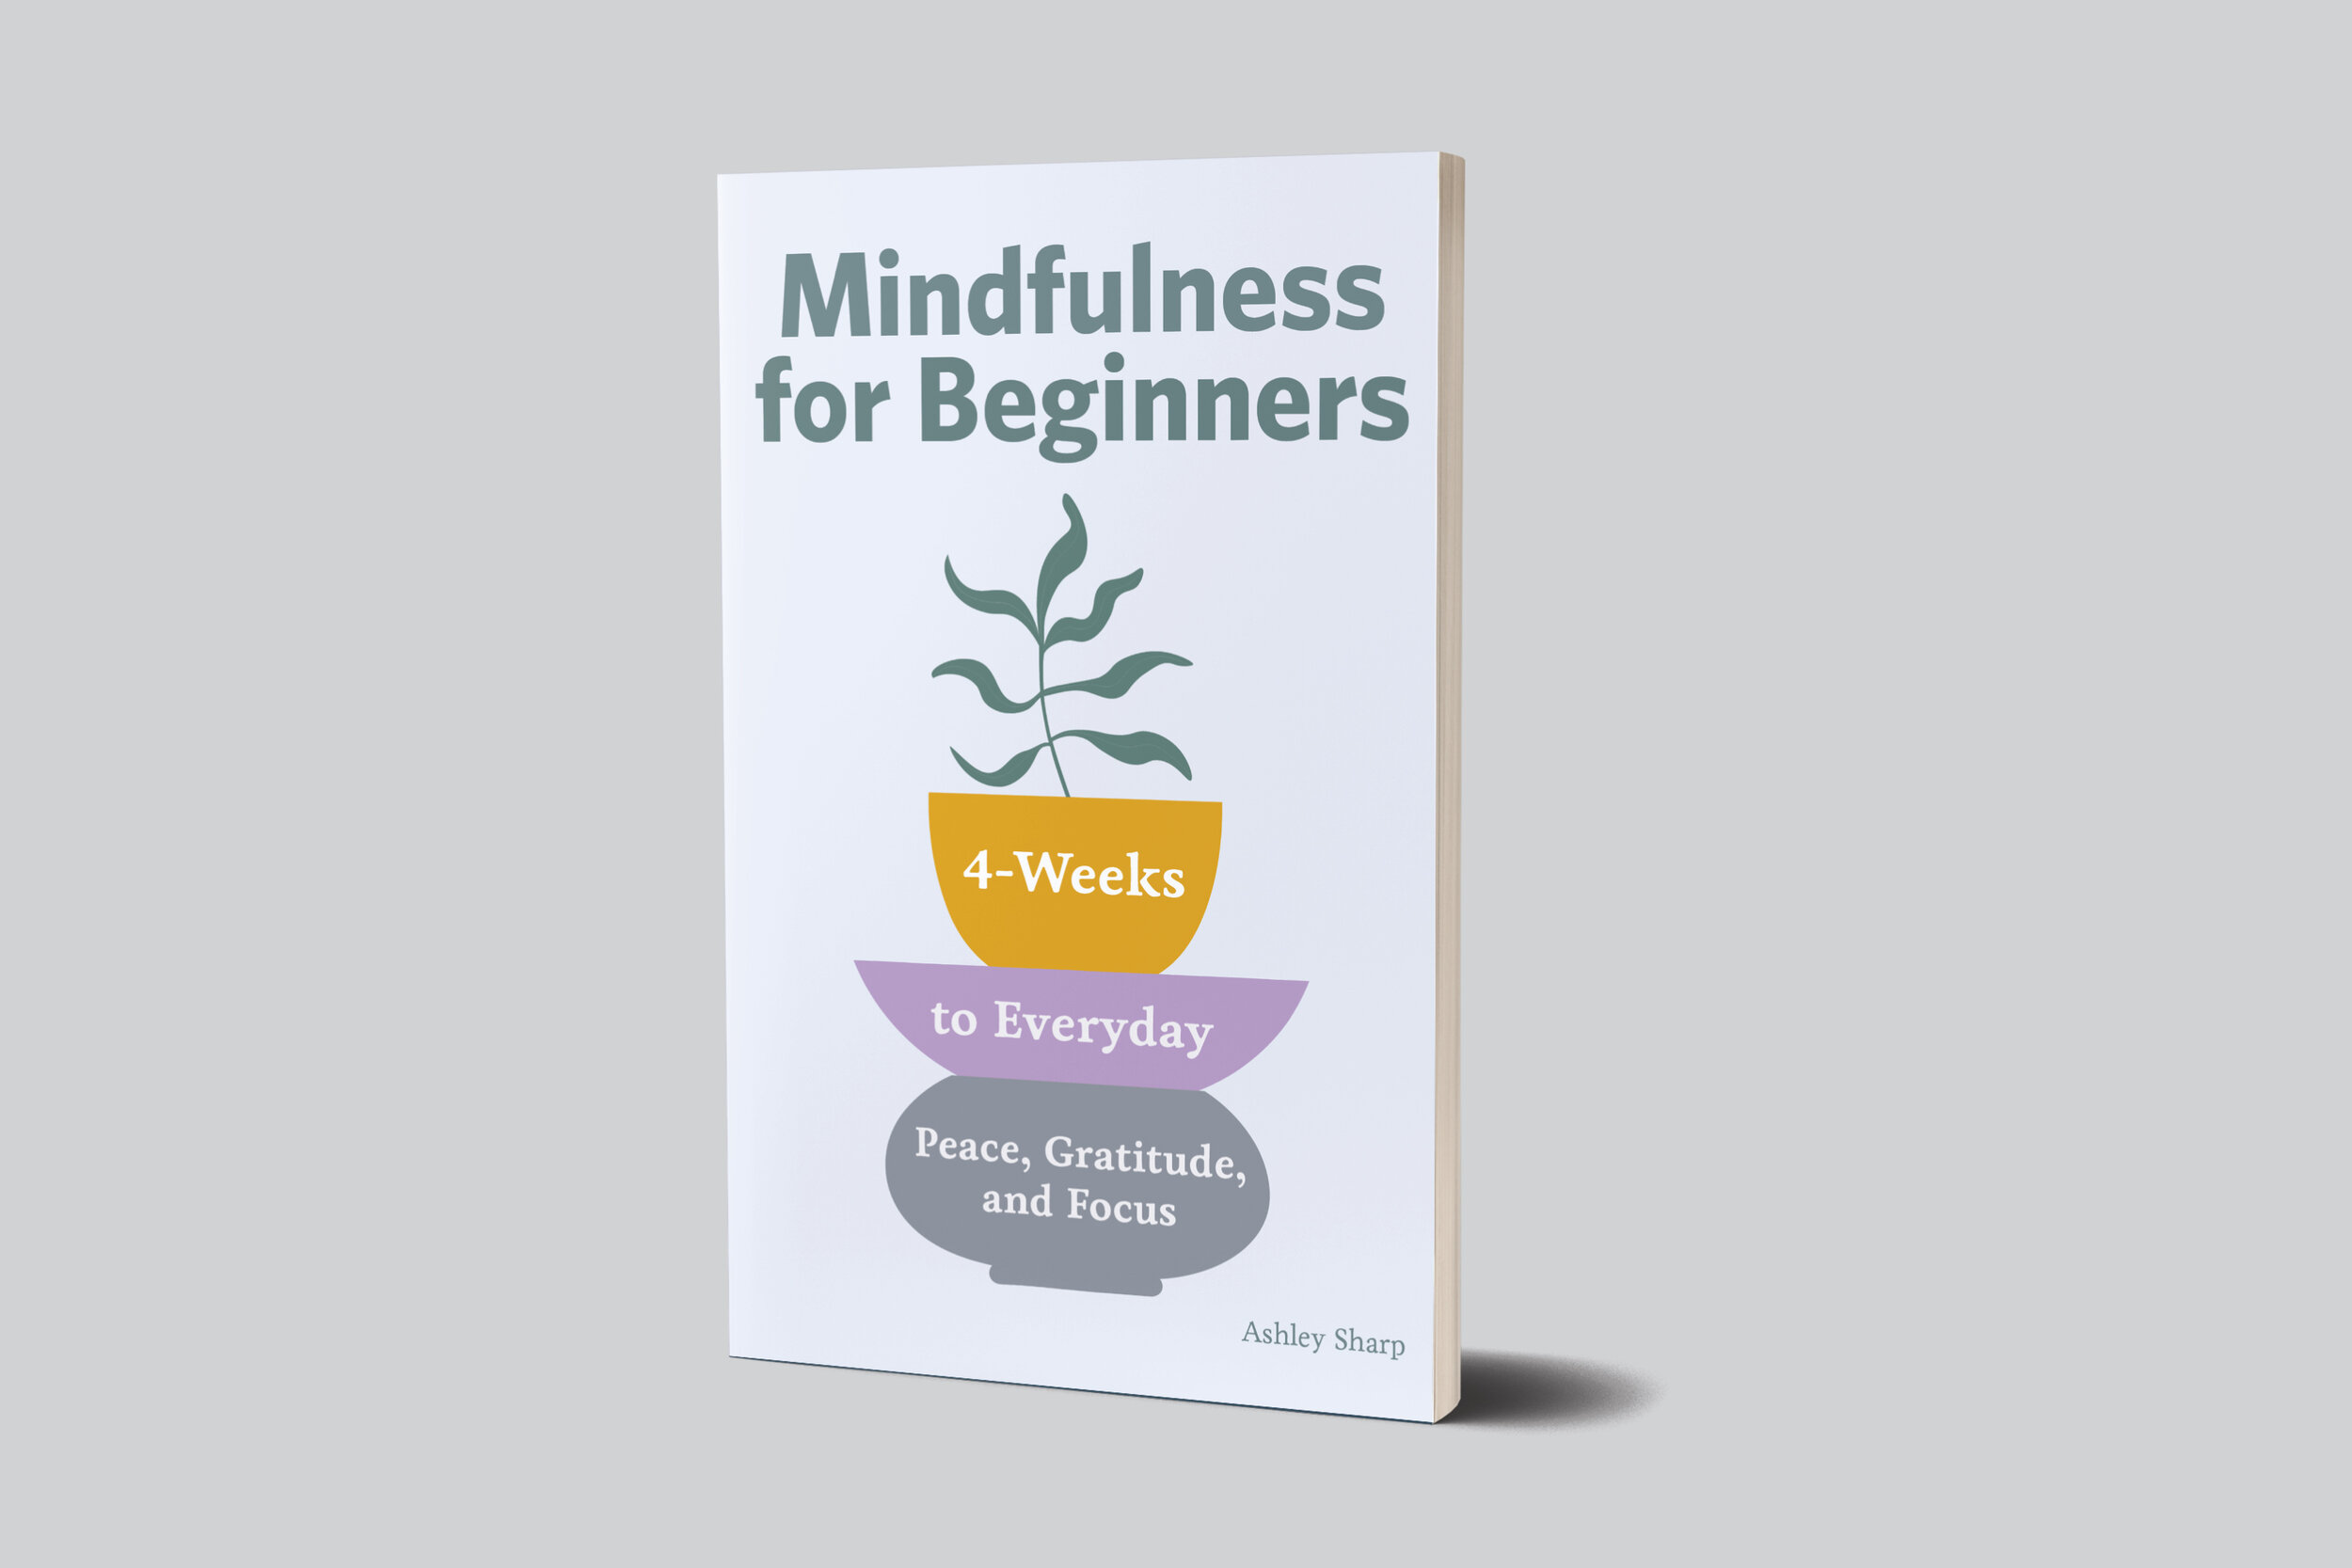 Mindfulness for Beginners